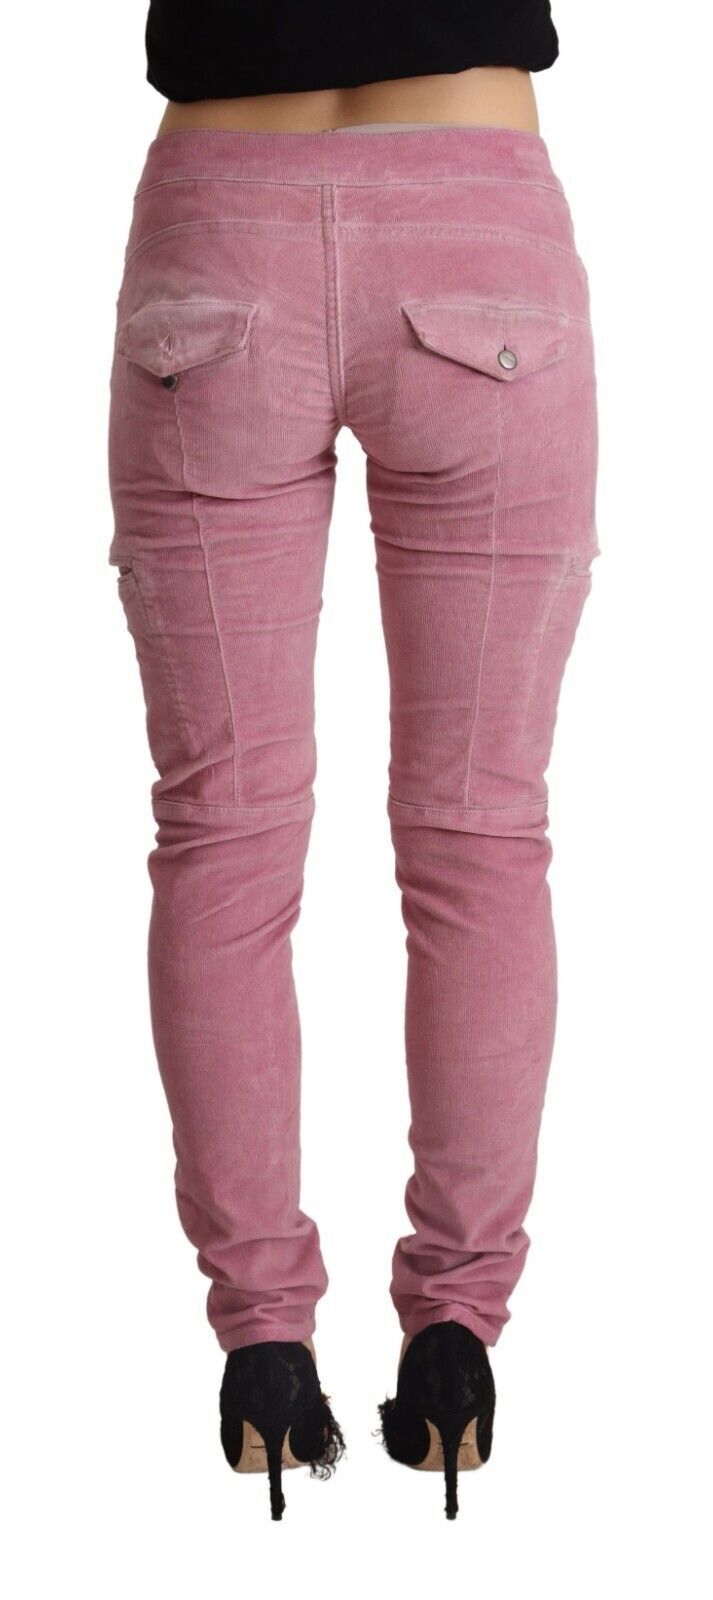 Chic Pink Low Waist Skinny Jeans